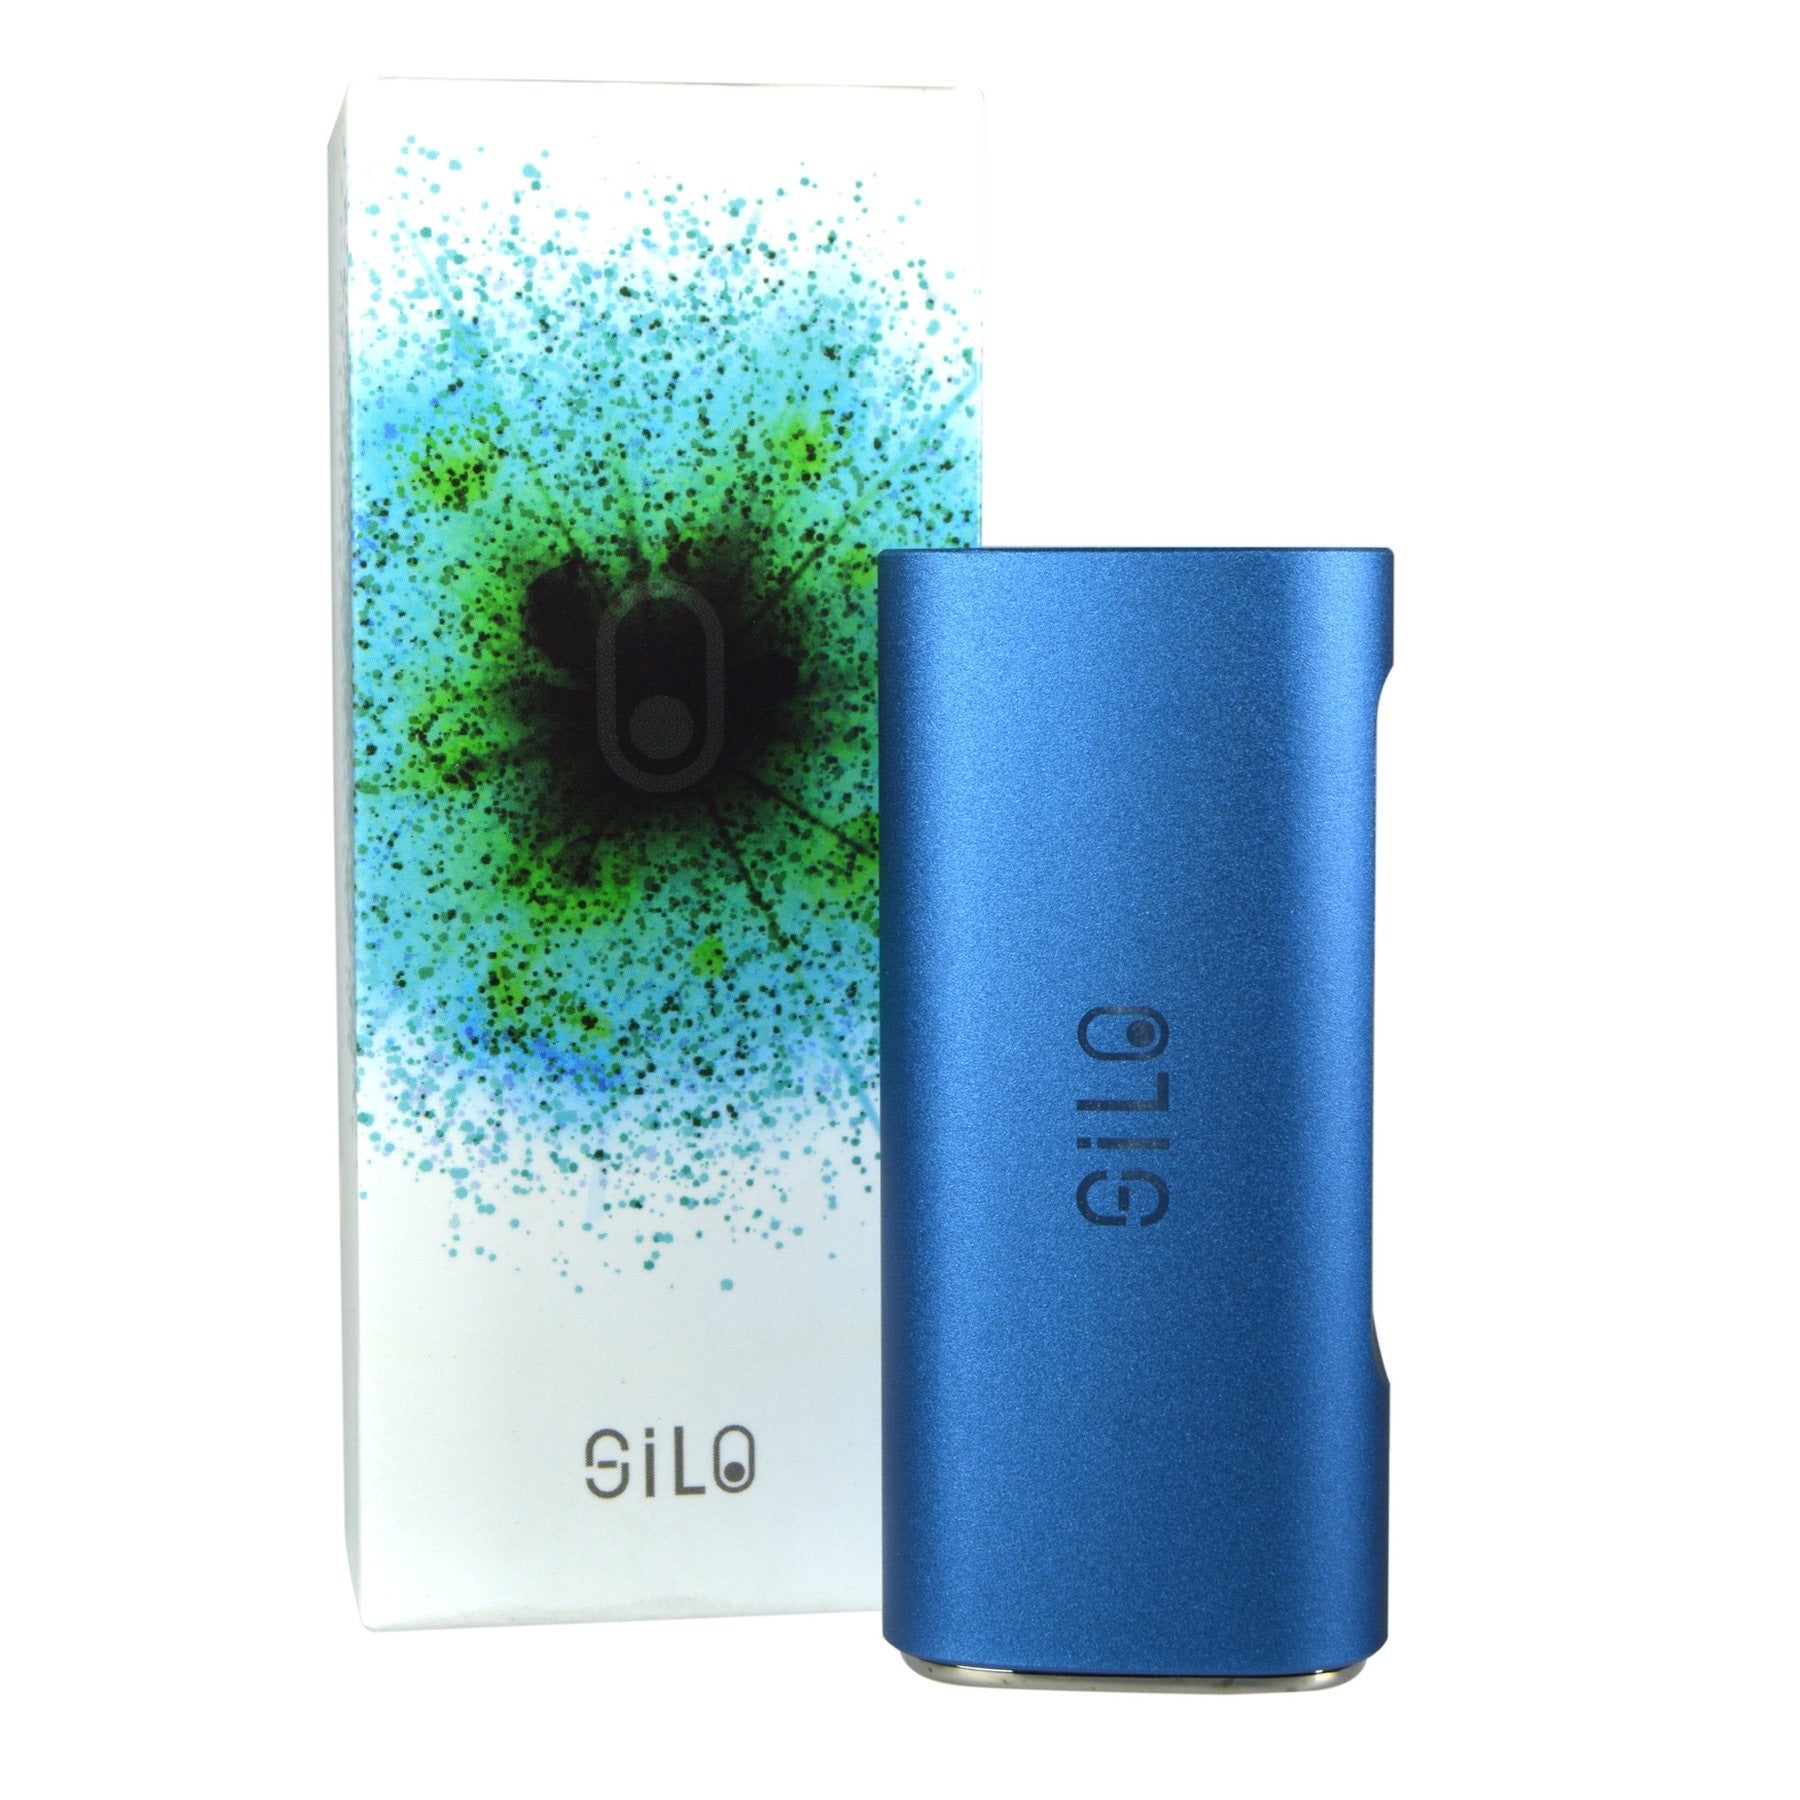 ccell silo battery review